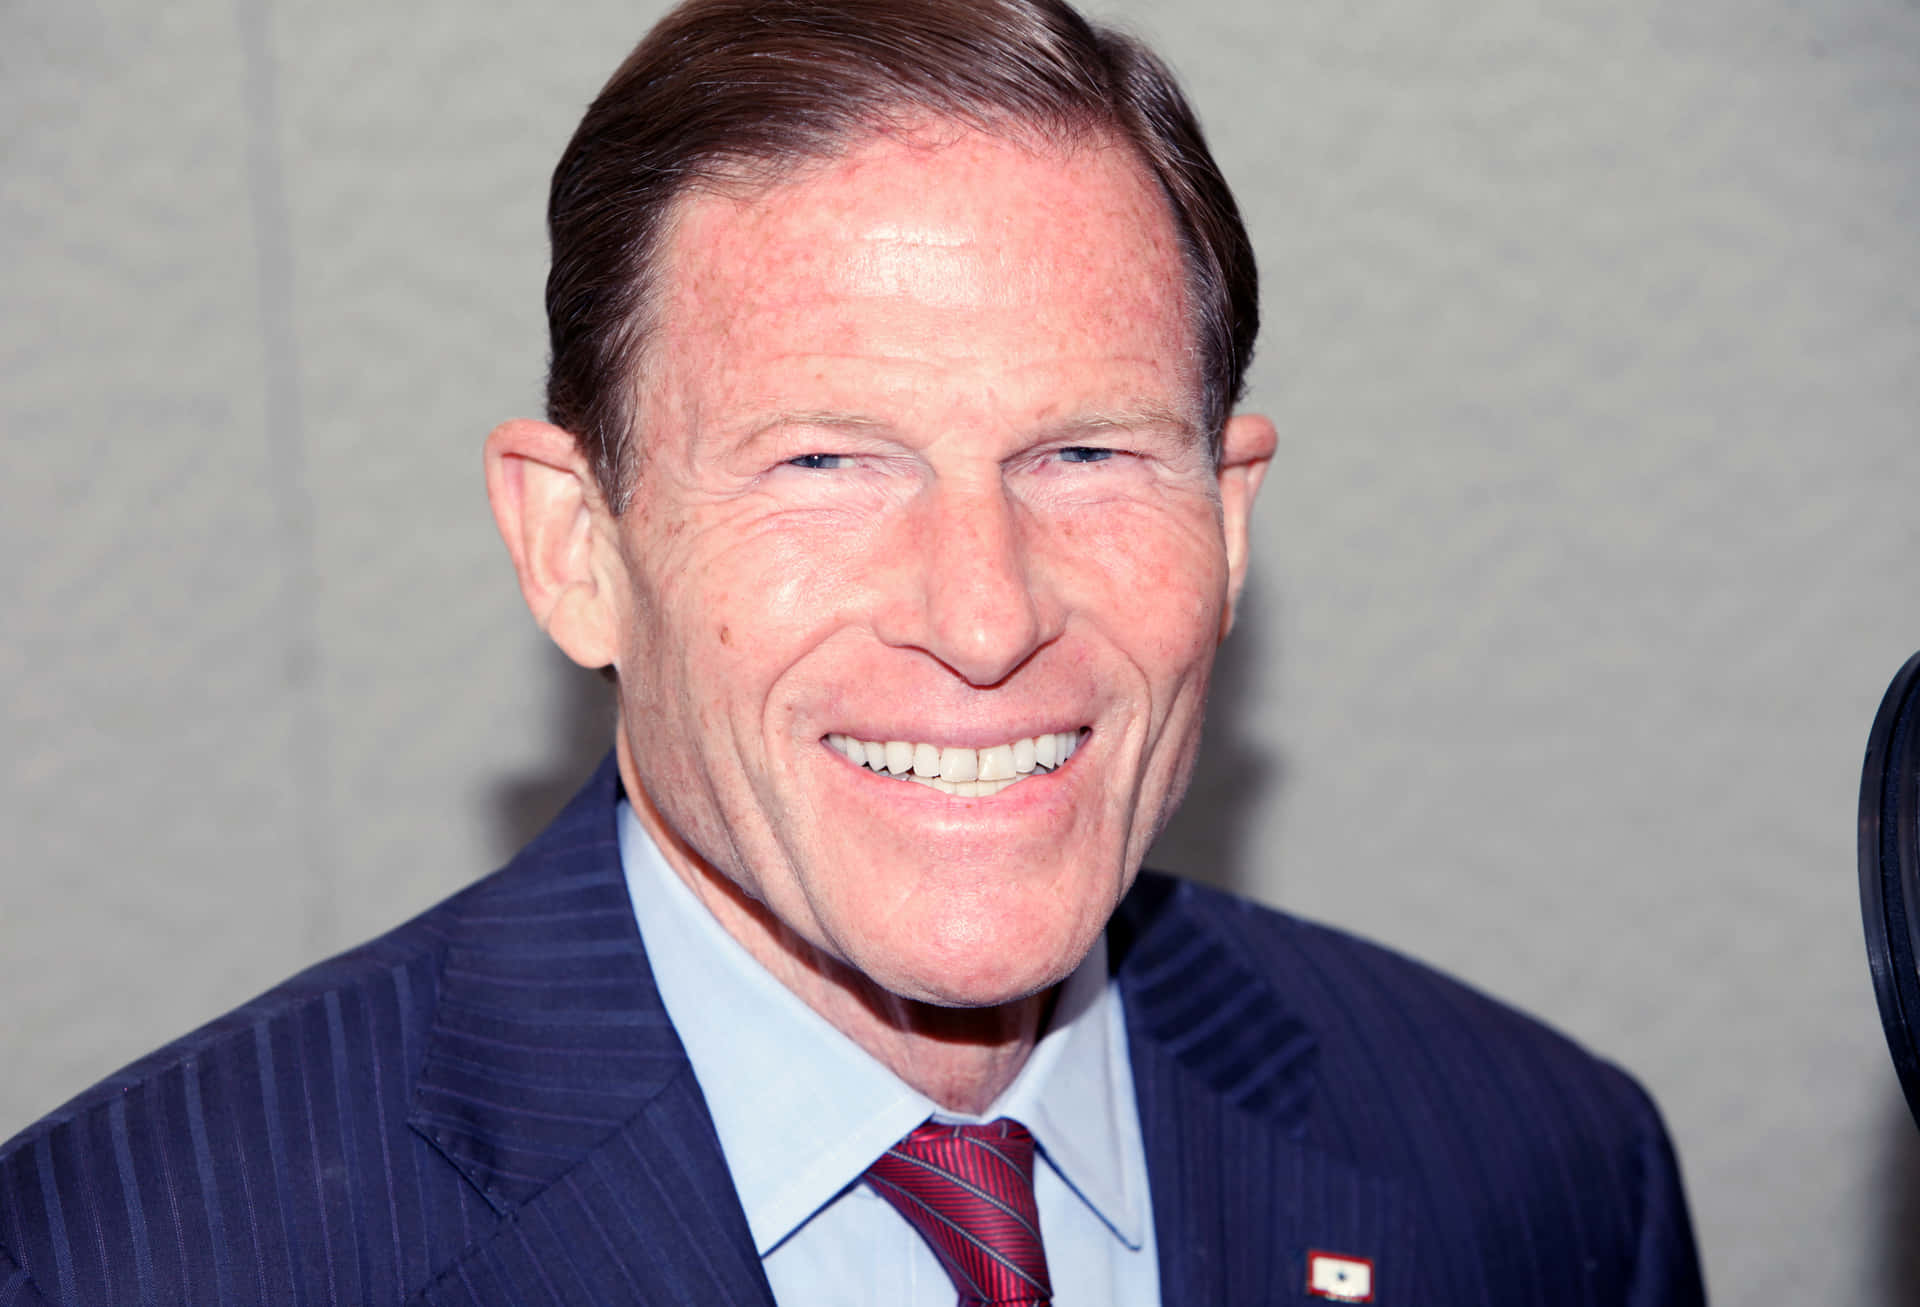 Richard Blumenthal Smiling In A Blue Suit Wallpaper